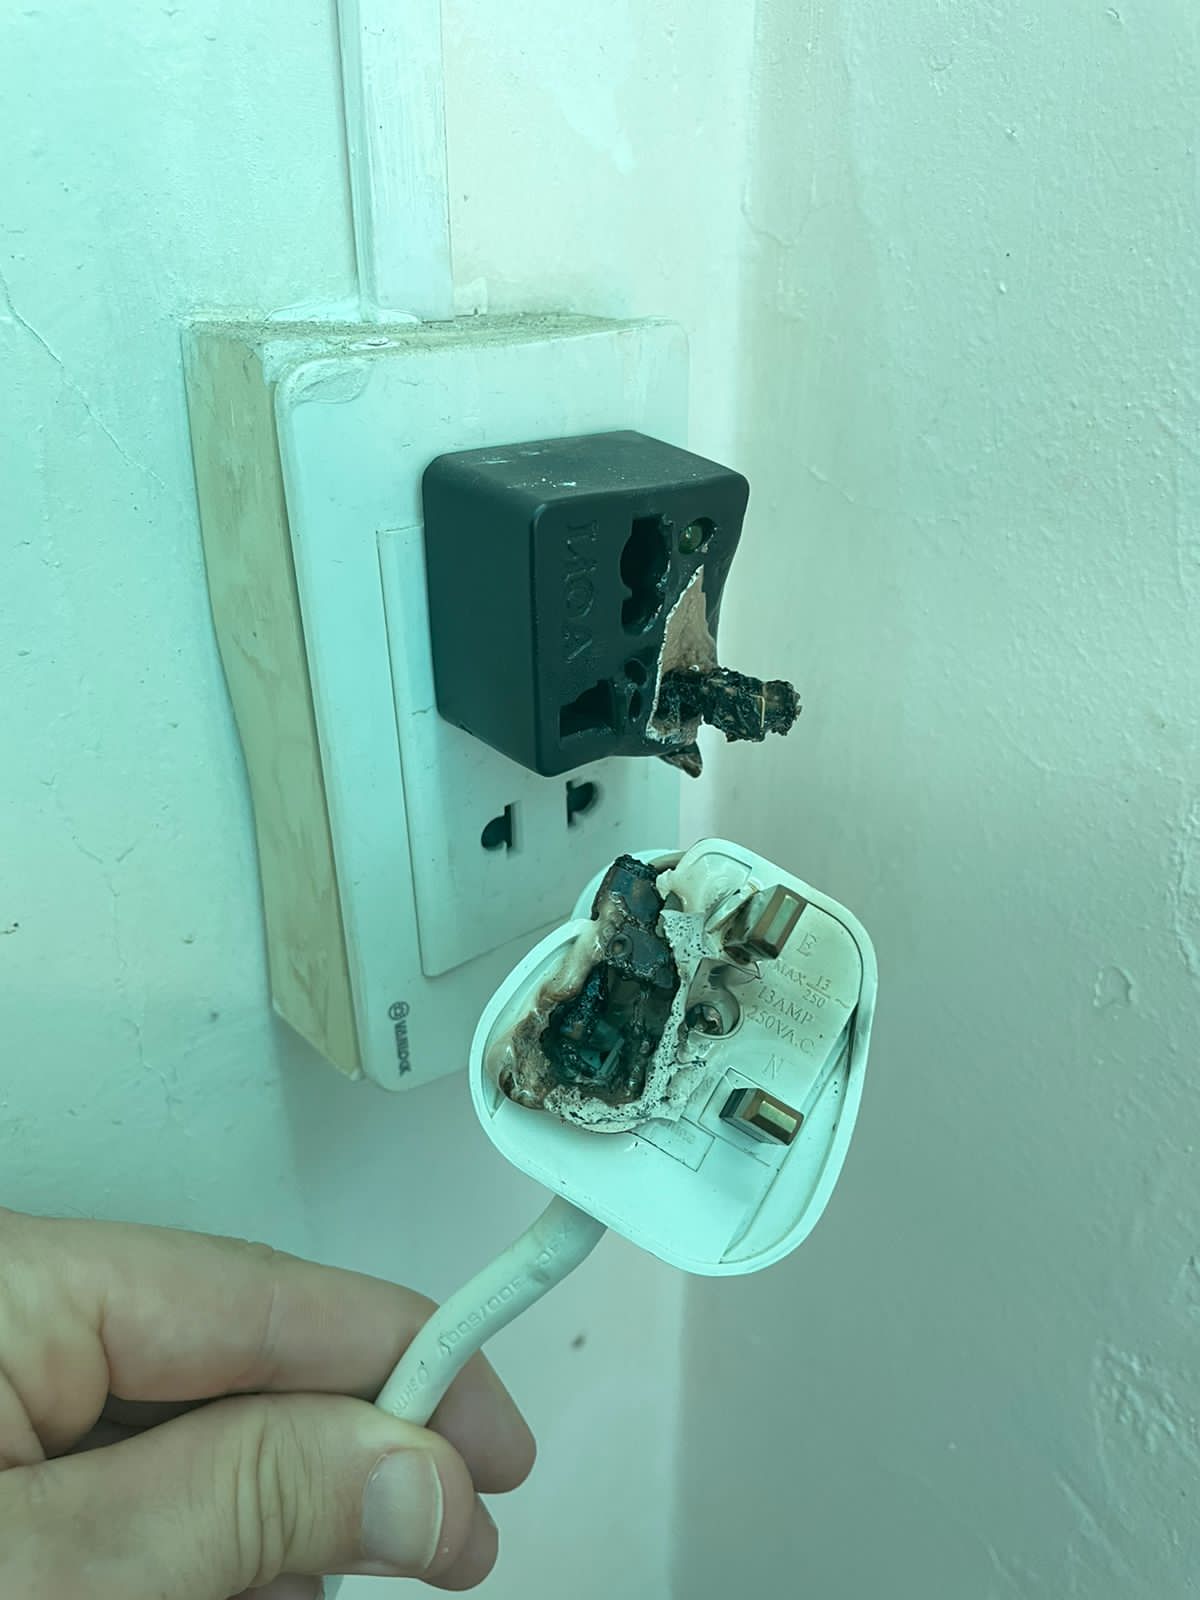 Outlet replacement and adaptor extenstion supply